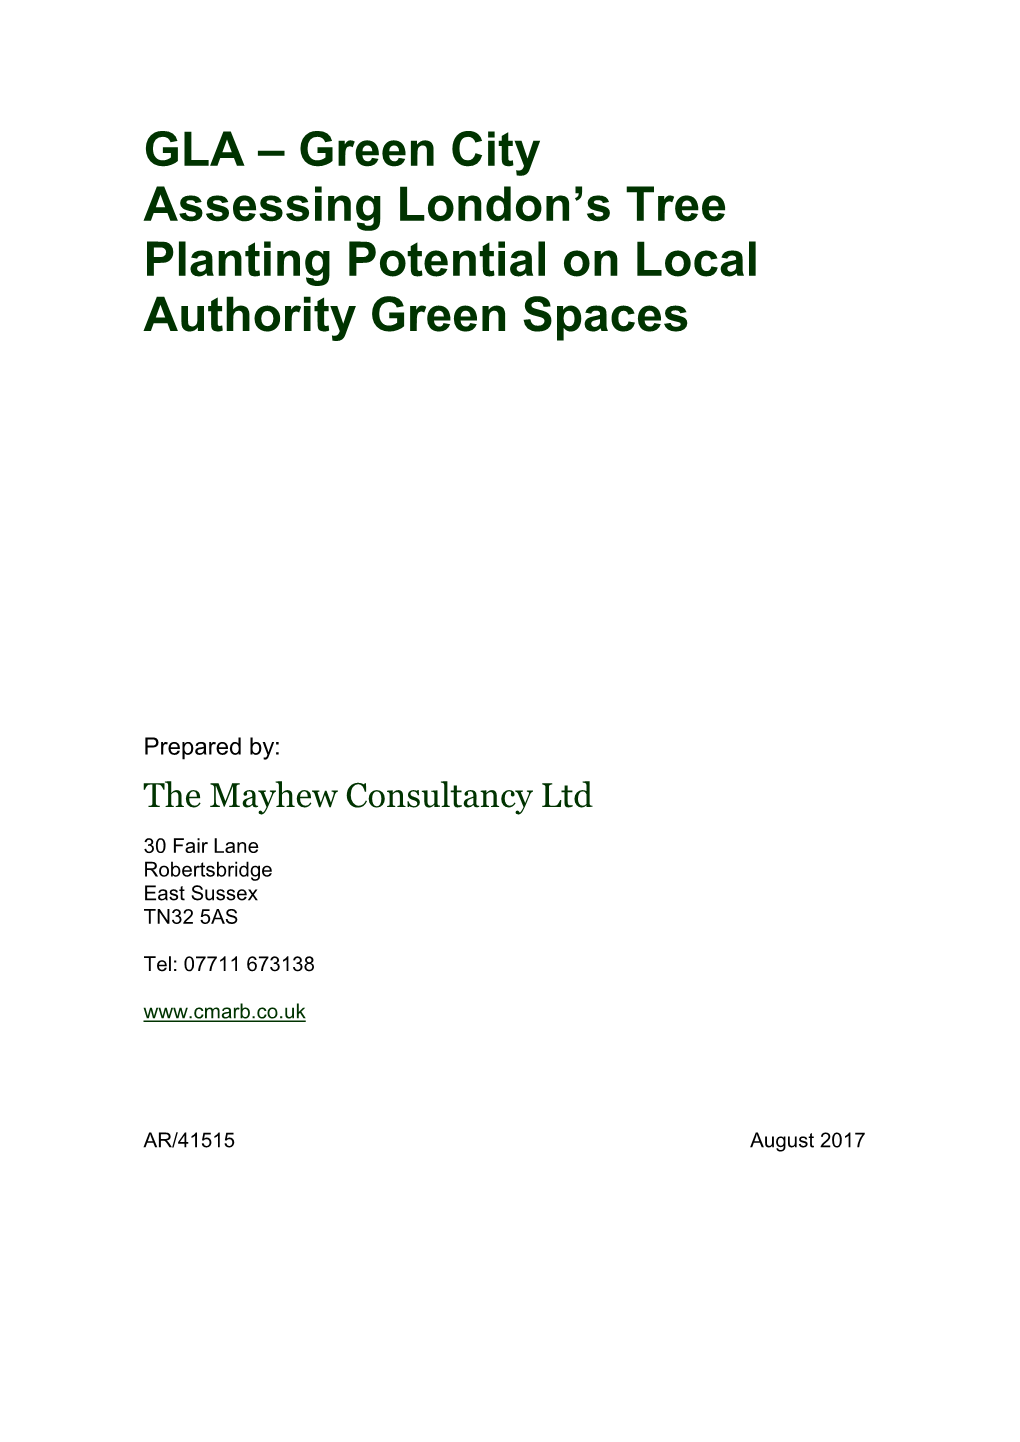 GLA – Green City Assessing London's Tree Planting Potential on Local